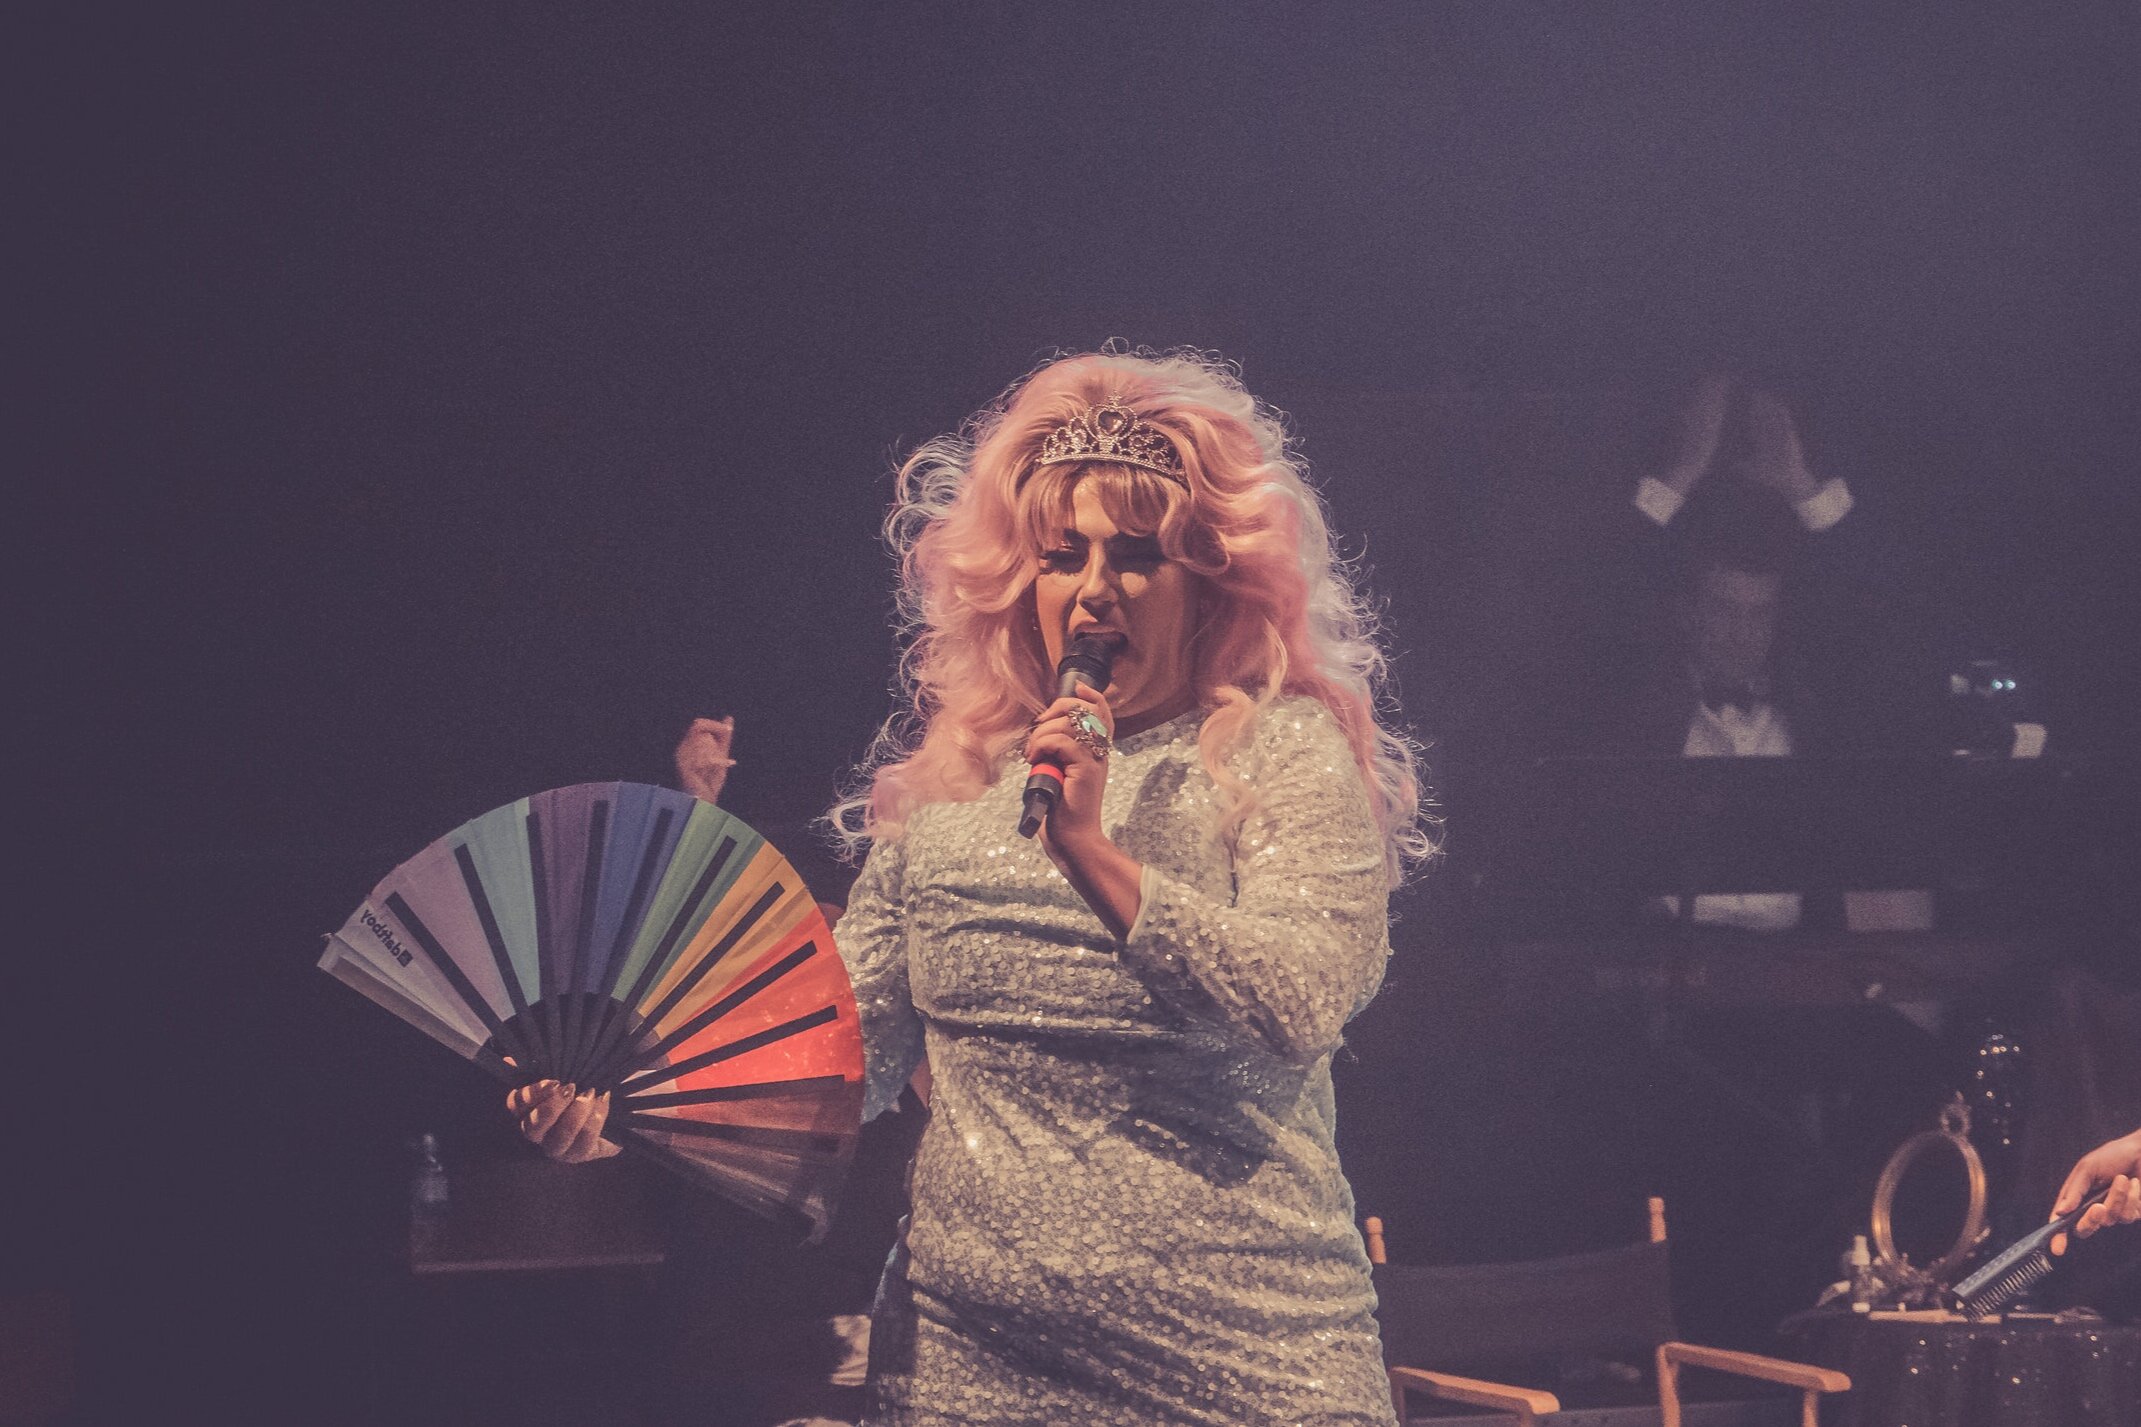 Image of a person in a pink wig, tiara and silver dress holding a rainbow fan singing into a microphone.